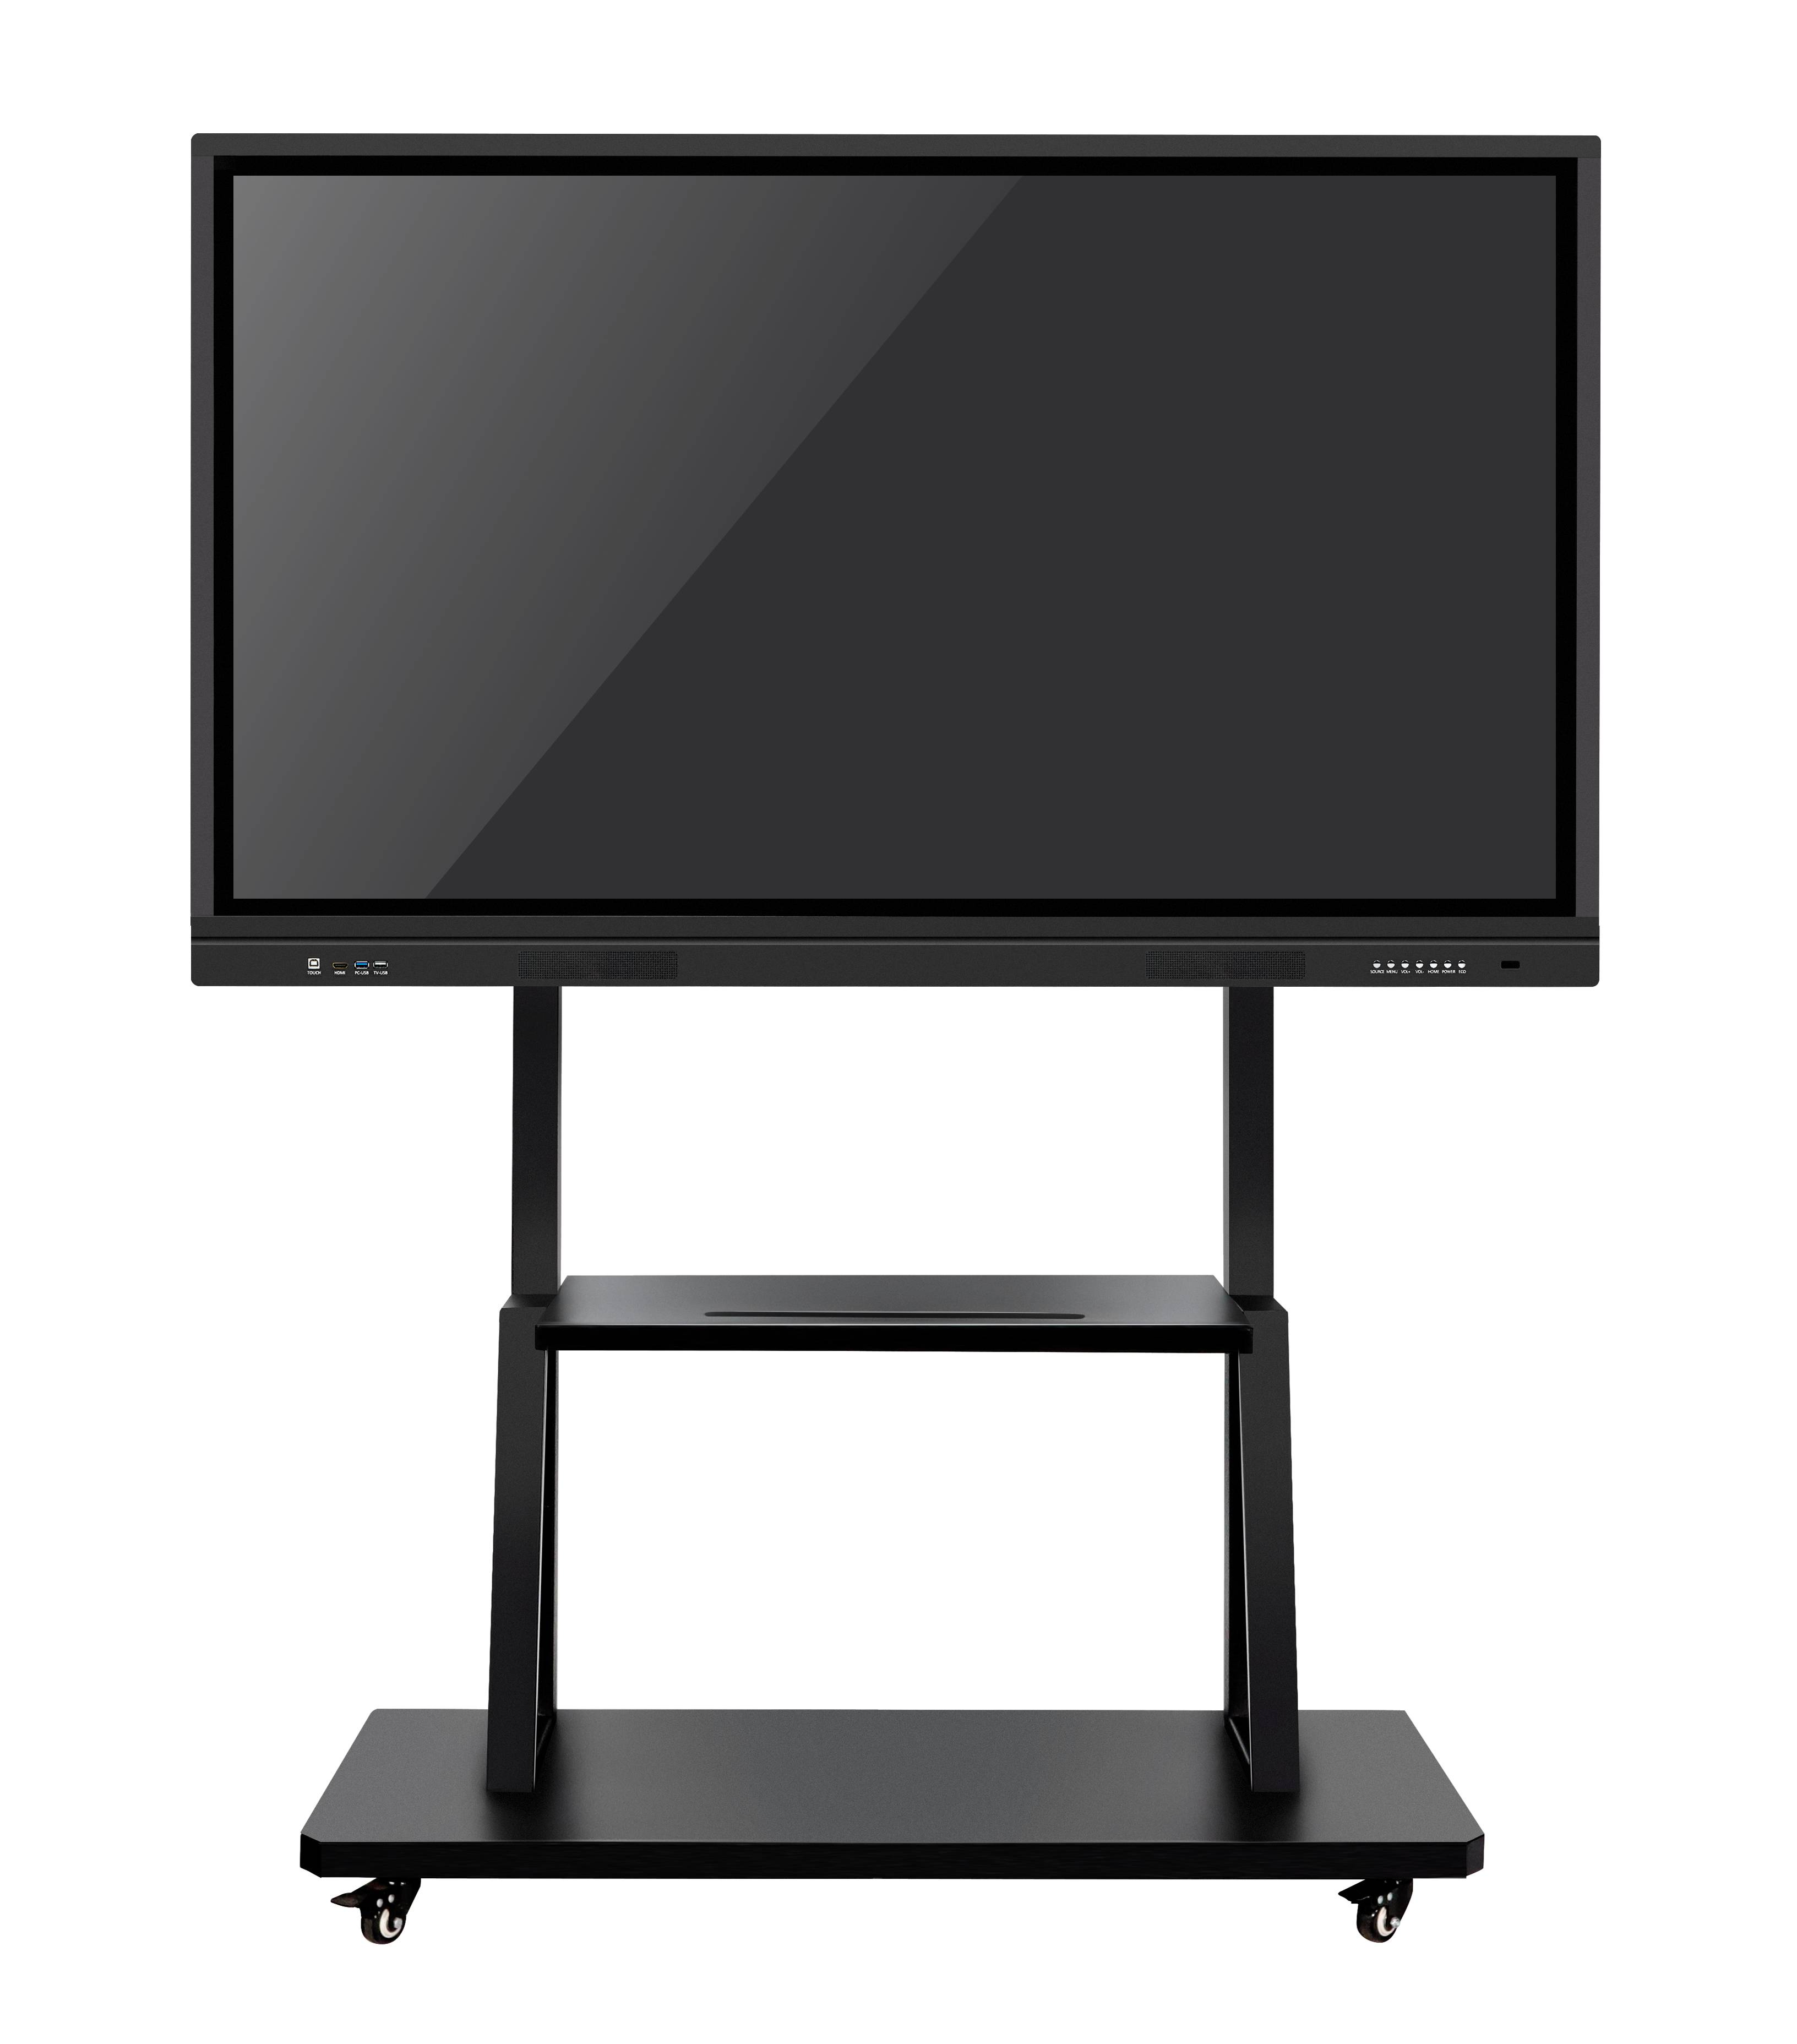 Ingscreen Preprimary Series Interactive Flat Panel Display Featured Image